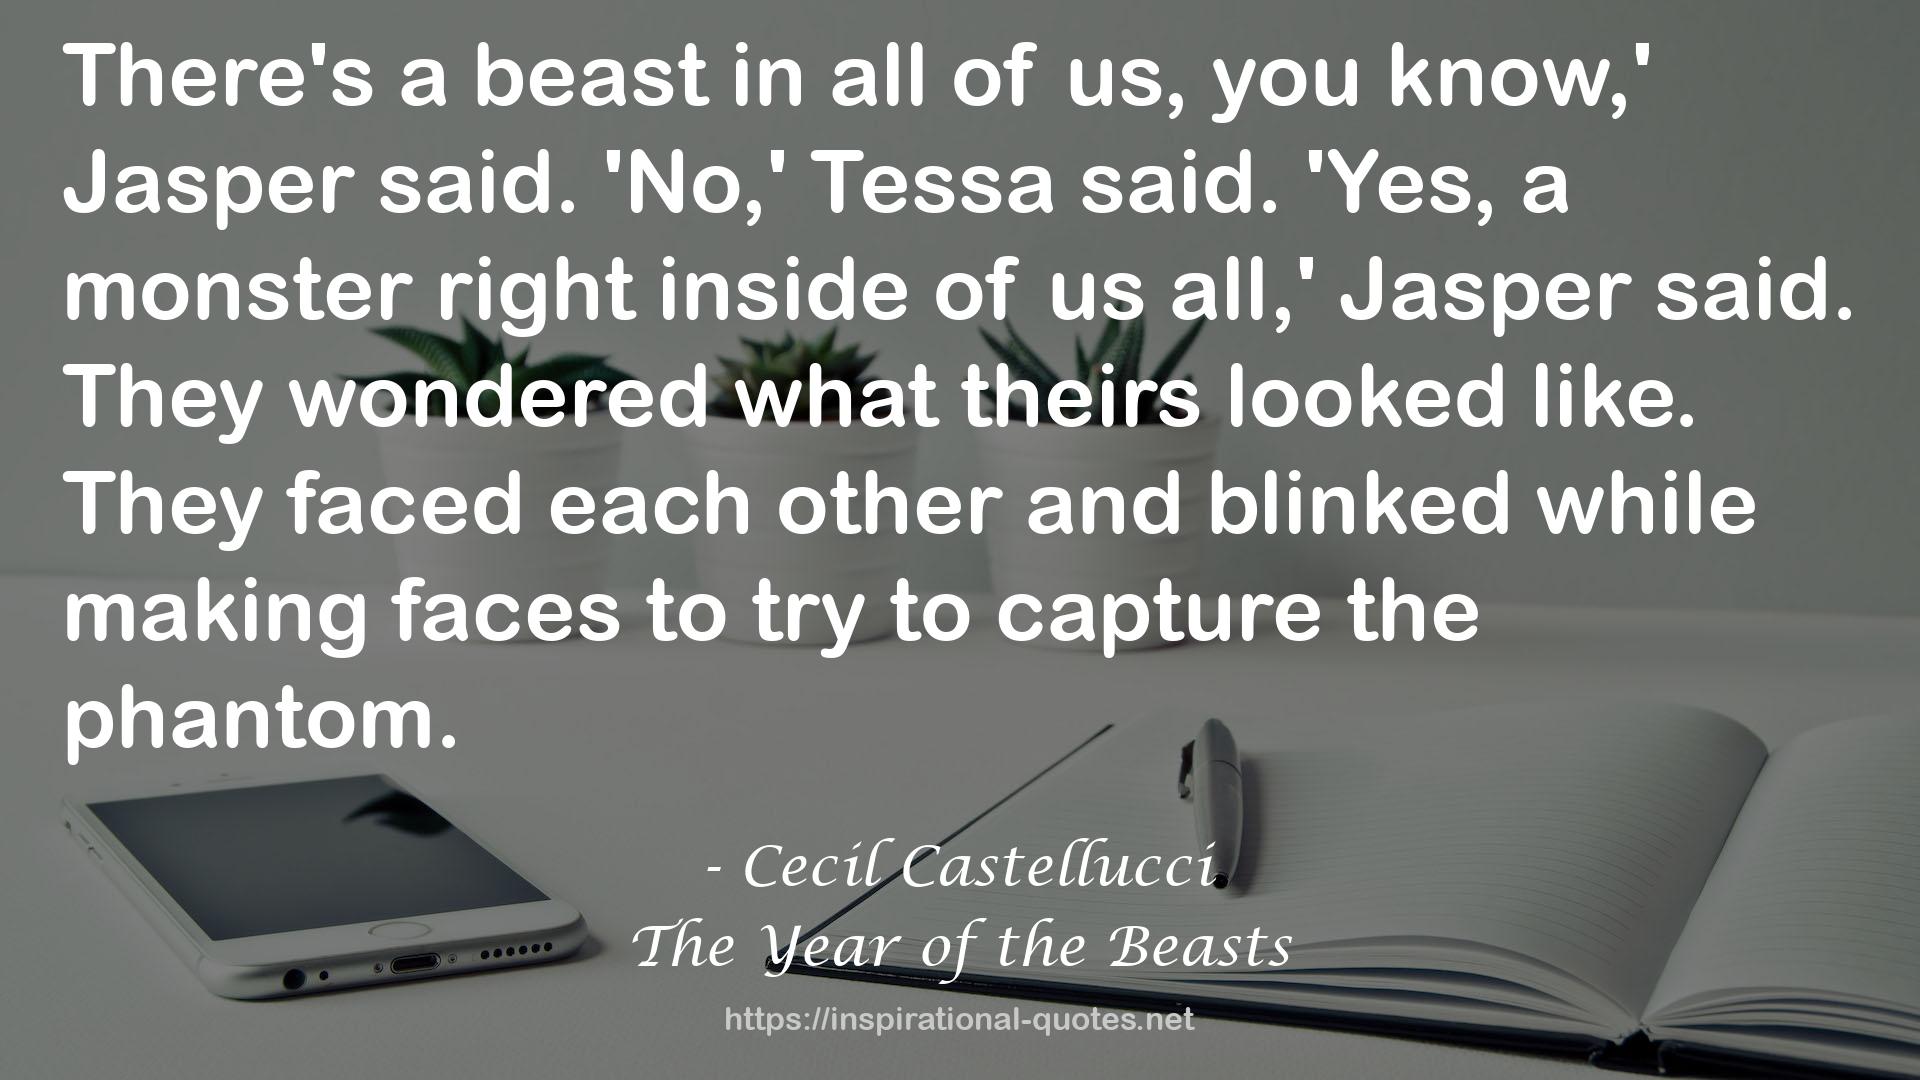 The Year of the Beasts QUOTES